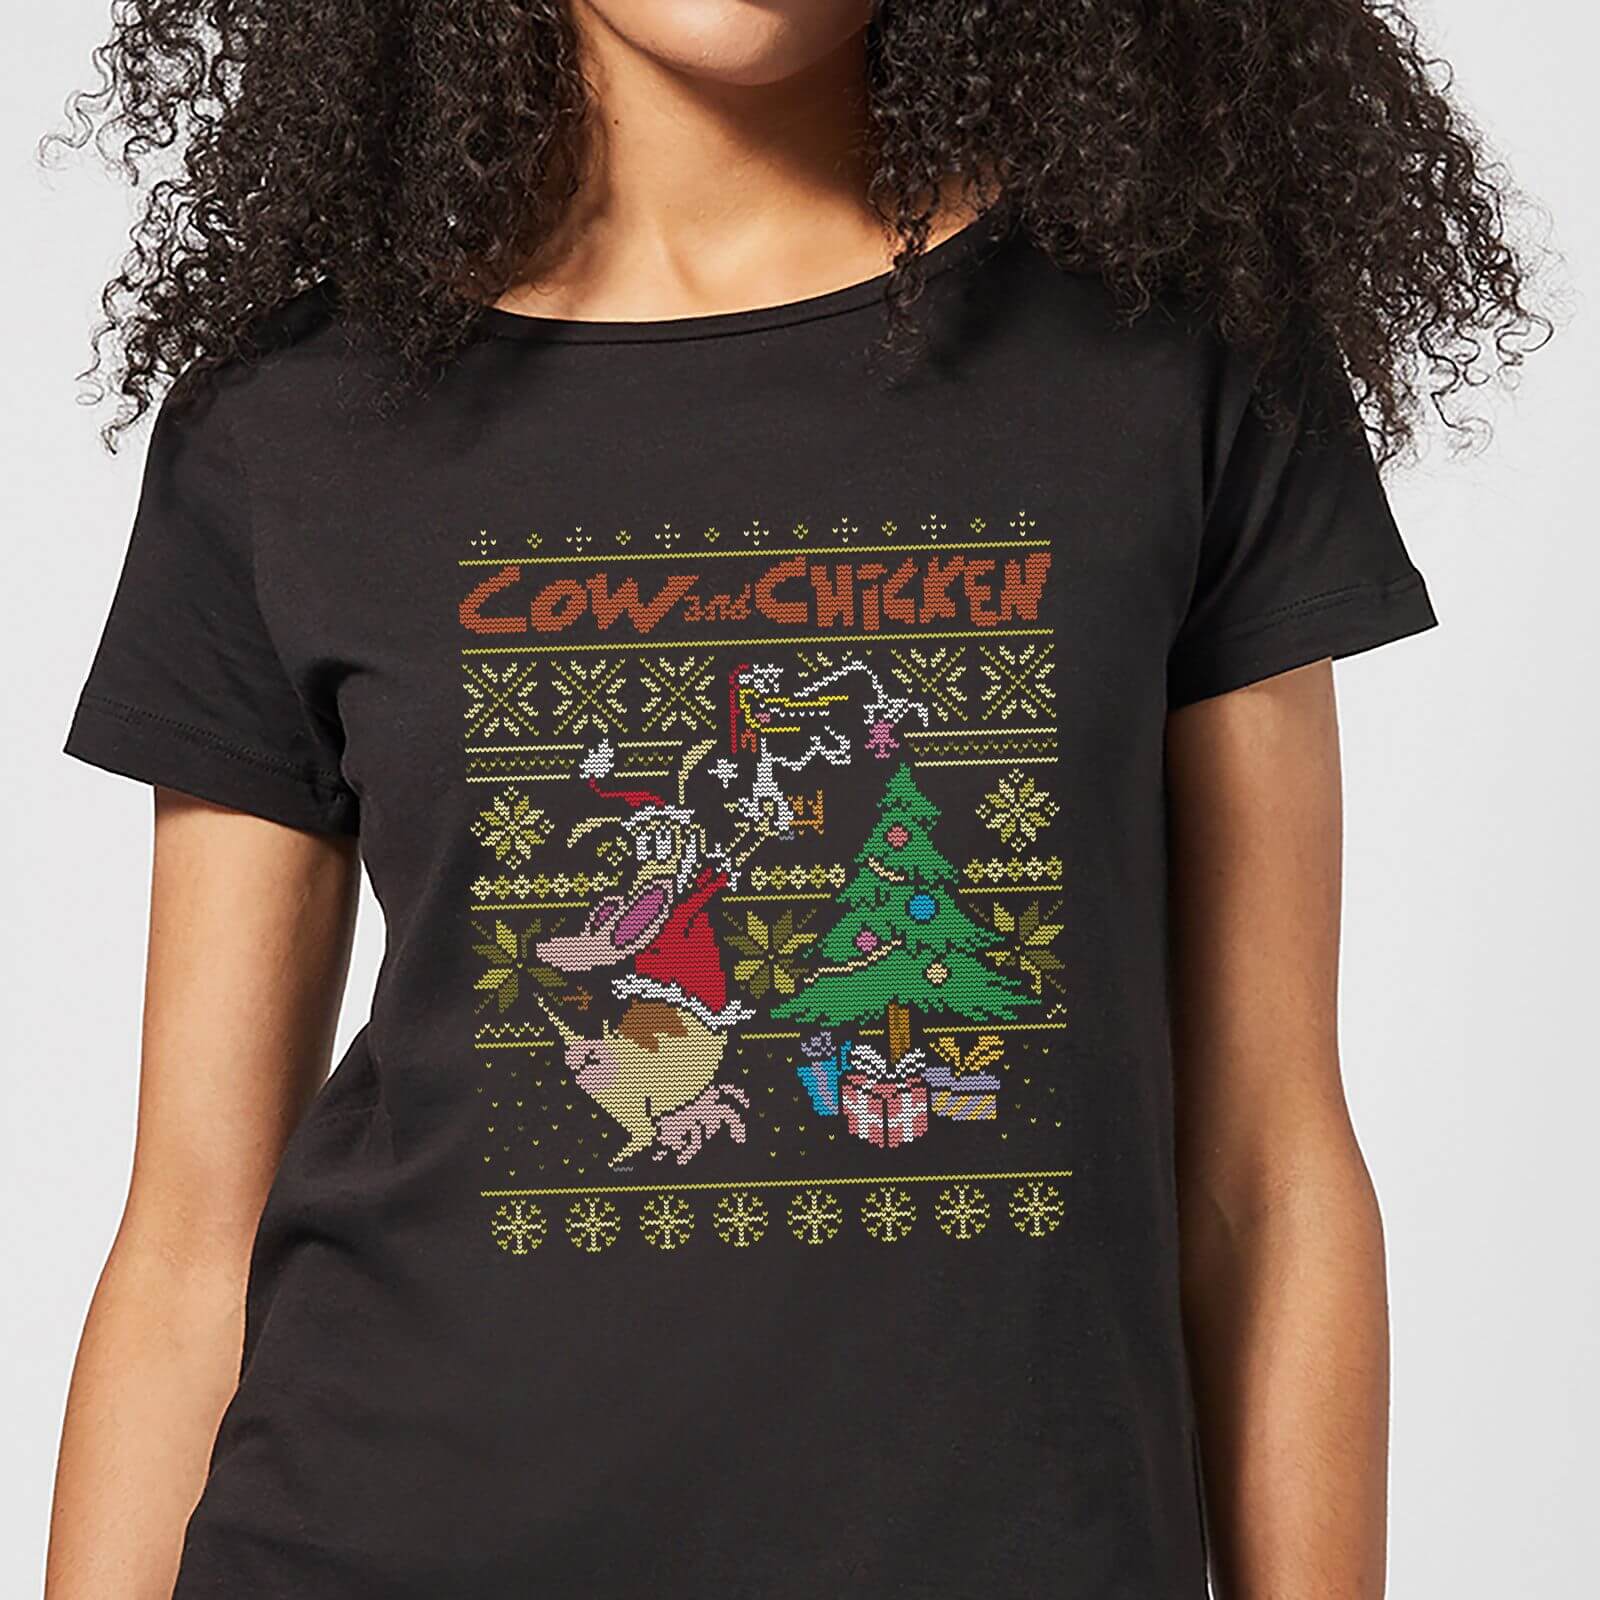 cartoon network cow and chicken cow and chicken pattern womens christmas t-shirt - black - s schwarz